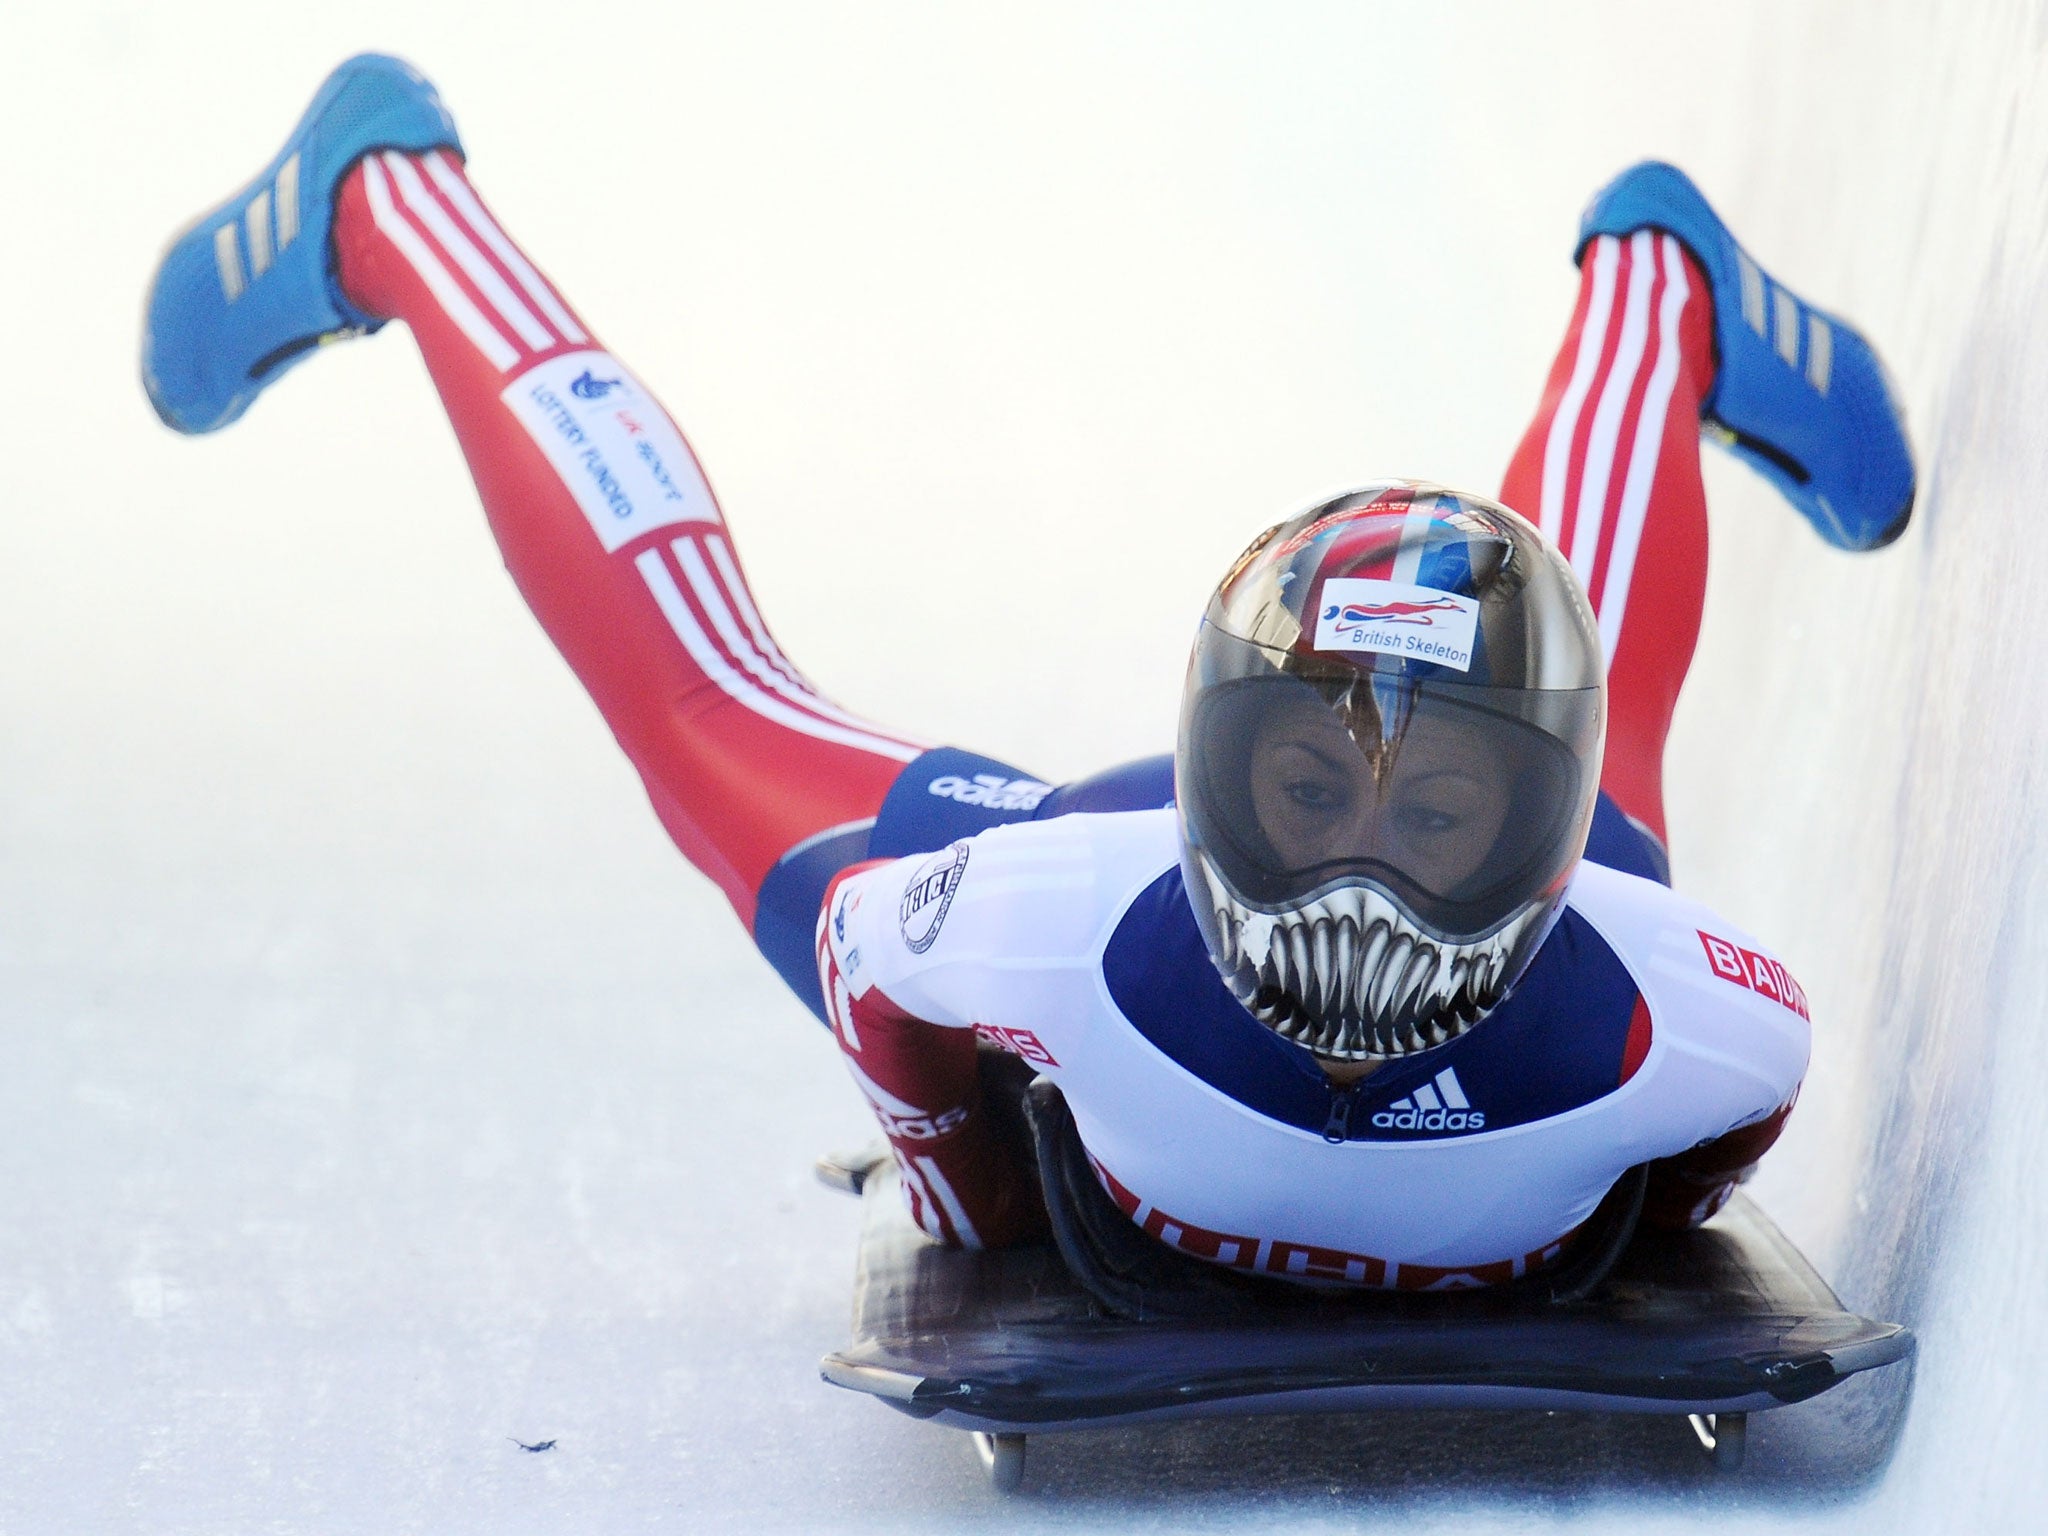 Shelley Rudman of Great Britain crosses the finishline after the women's skeleton second heat of the IBSF Bob & Skeleton World Championship